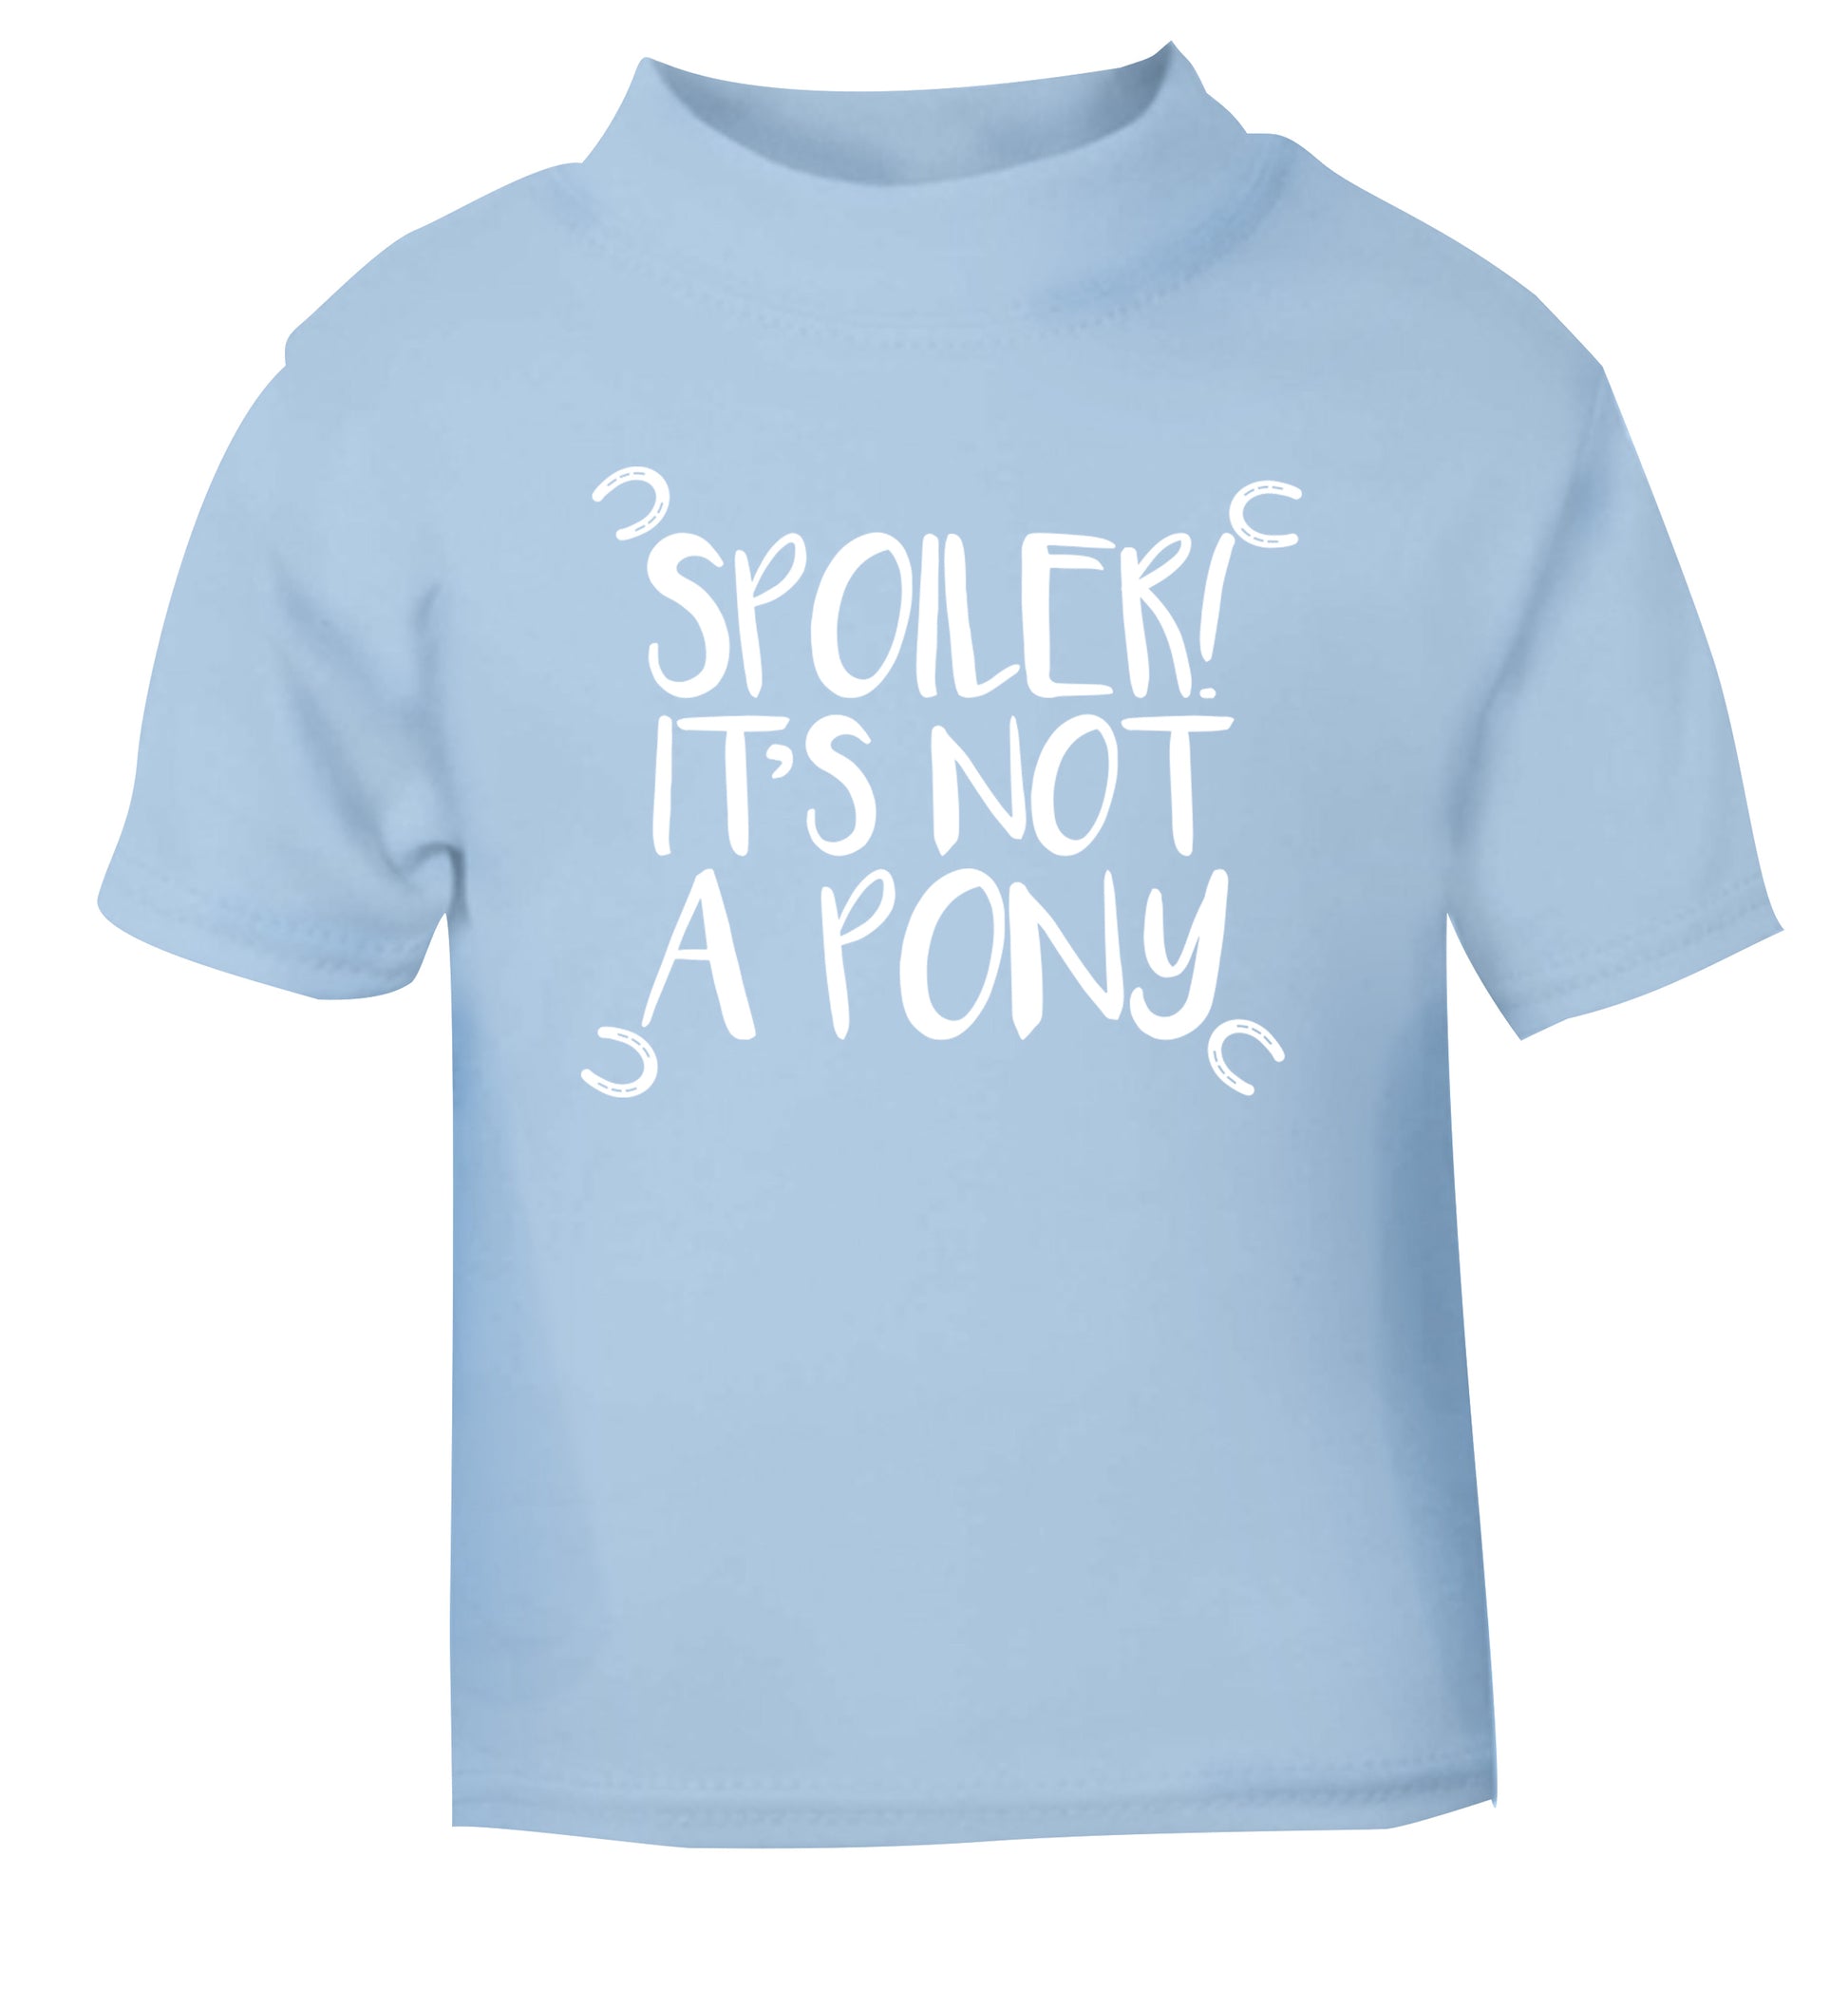 Spoiler it's not a pony light blue Baby Toddler Tshirt 2 Years